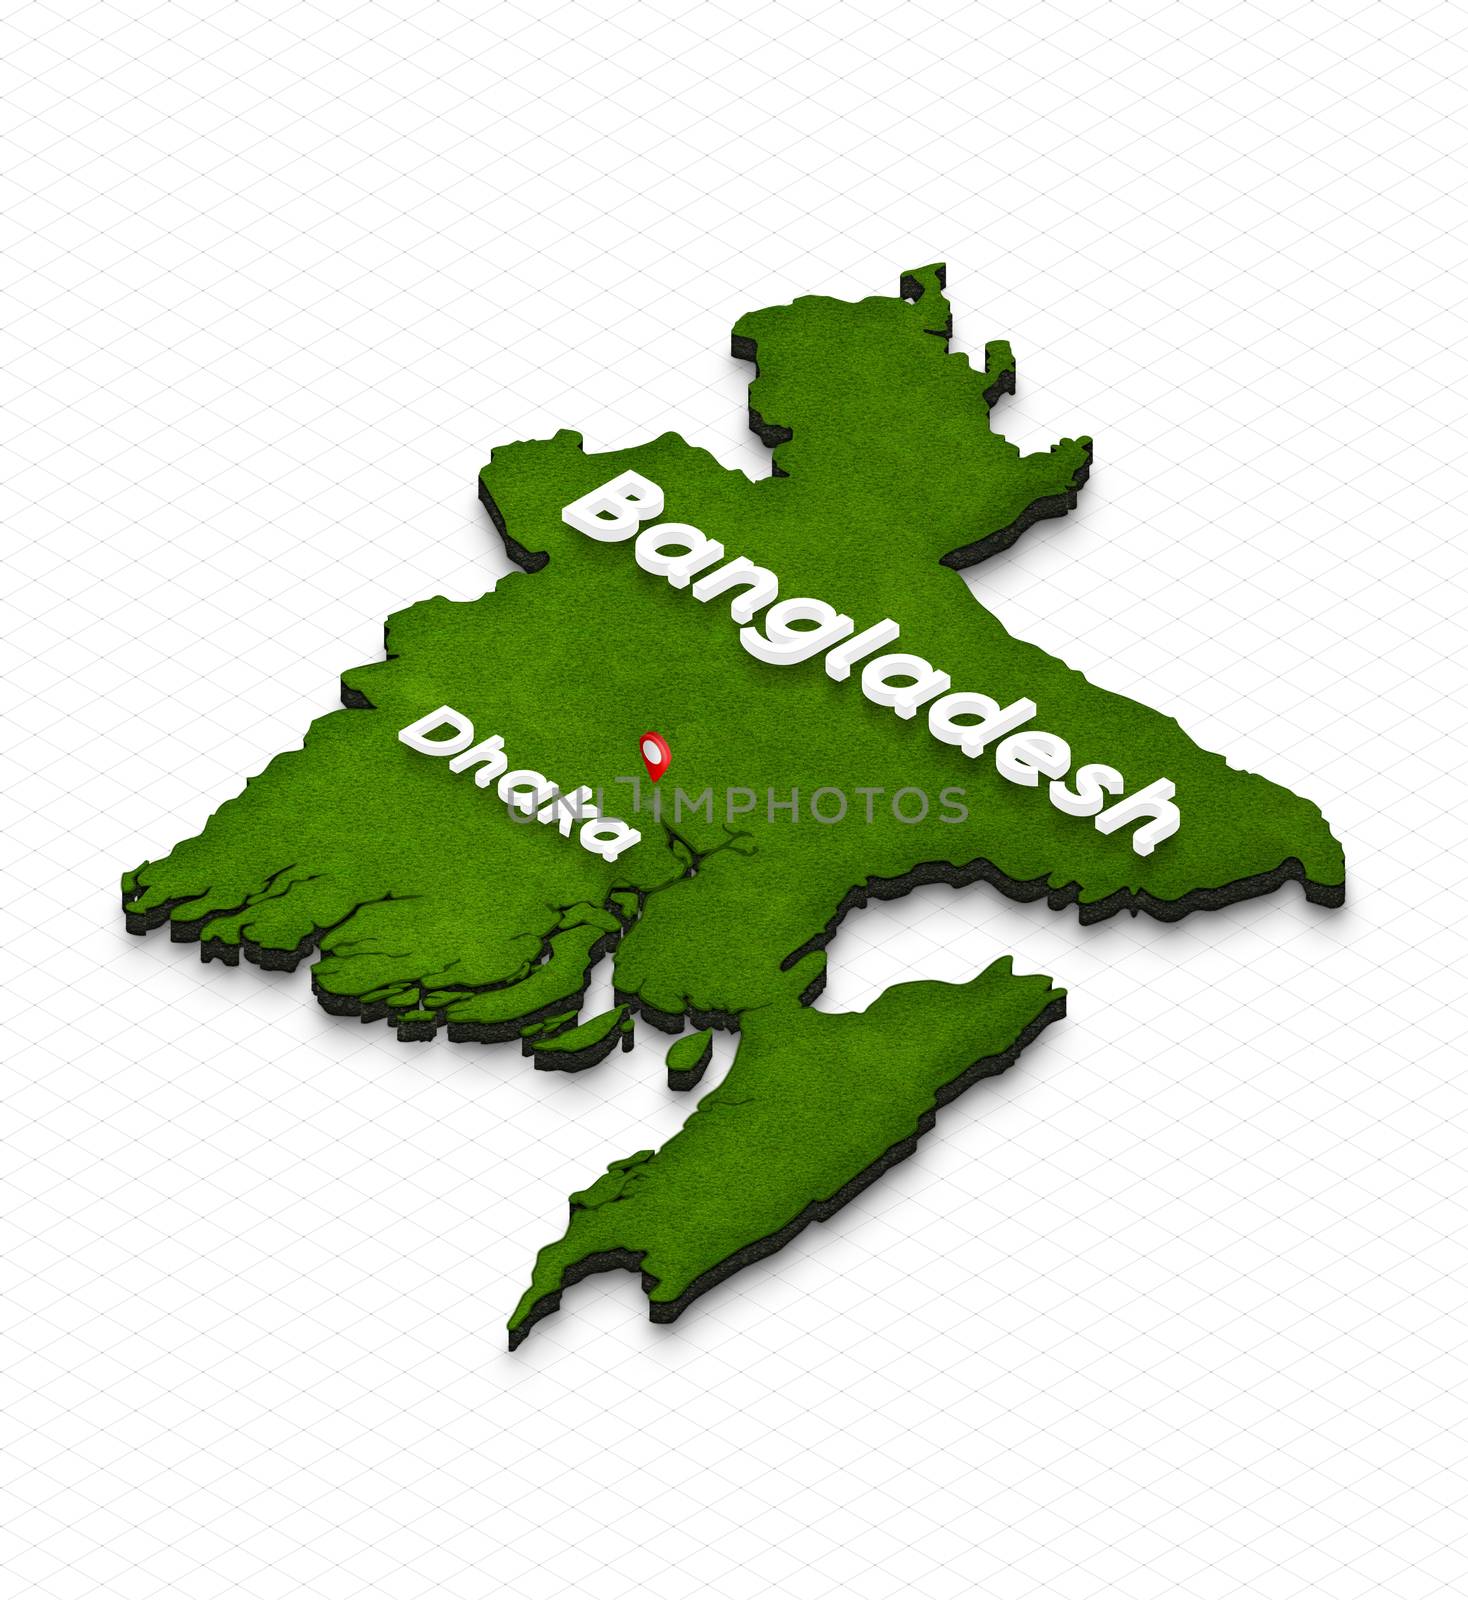 Illustration of a green ground map of Bangladesh on grid background. Left 3D isometric perspective projection with the name of country and capital Dhaka.